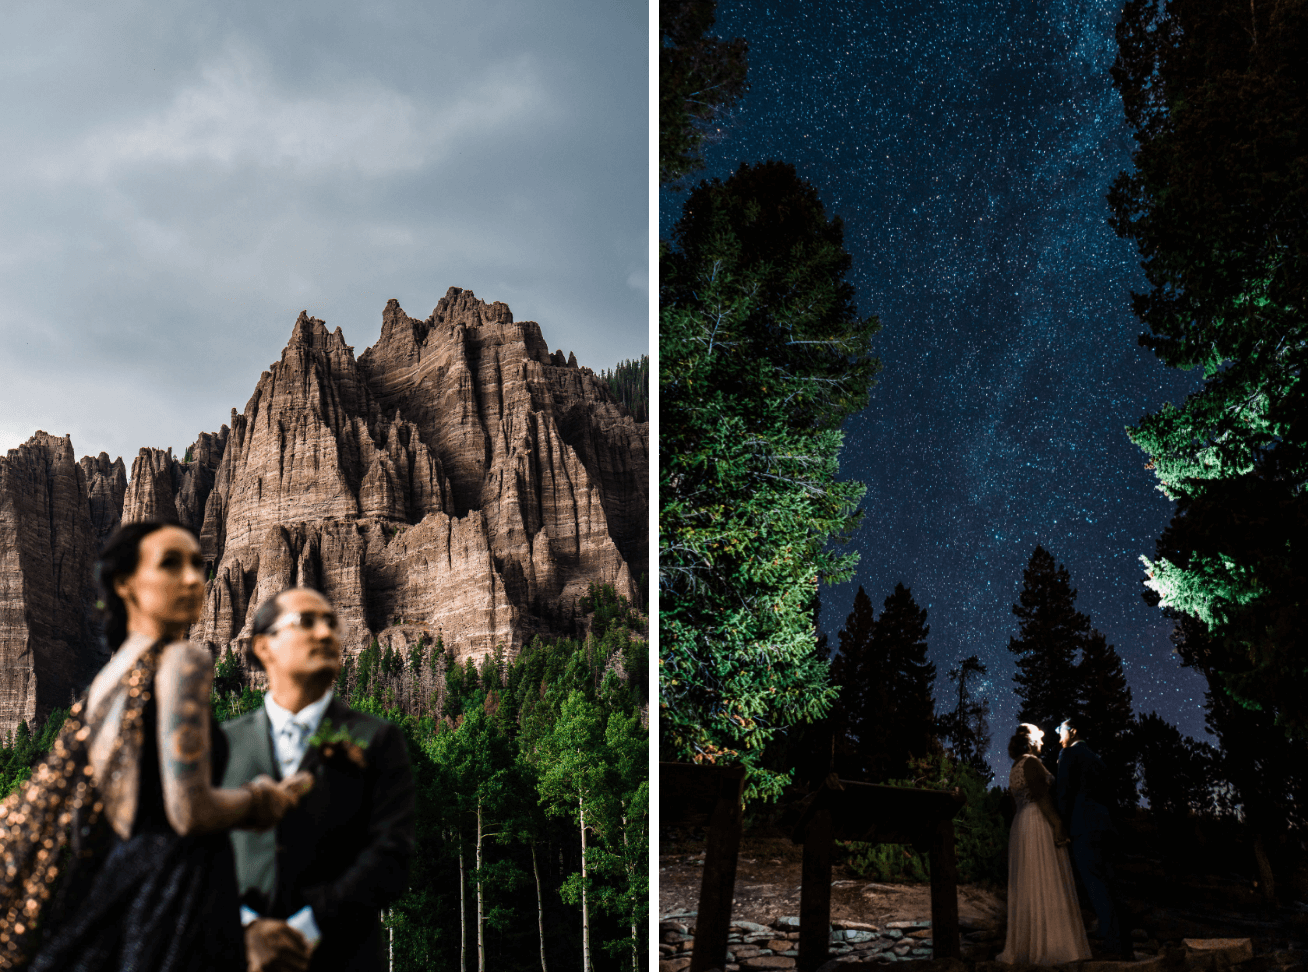 2 photos: a couple, out of focus in front of a mountain ridge in Colorado 2) a bride and groom under a starry night sky